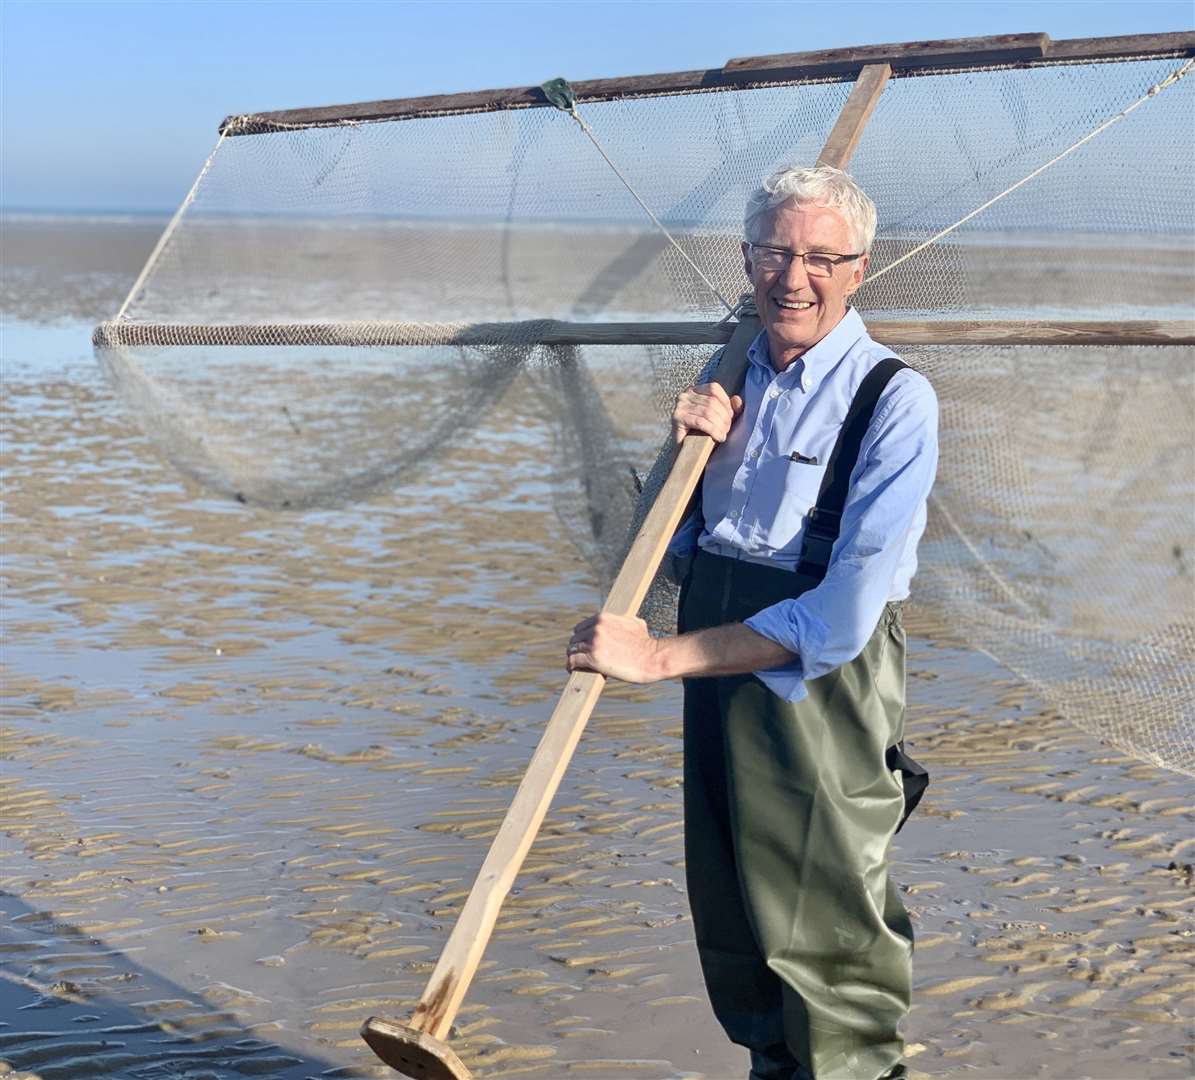 Paul O'Grady heads to Dungeness beach, to go 'shrimping' Picture: Olga Productions/ITV